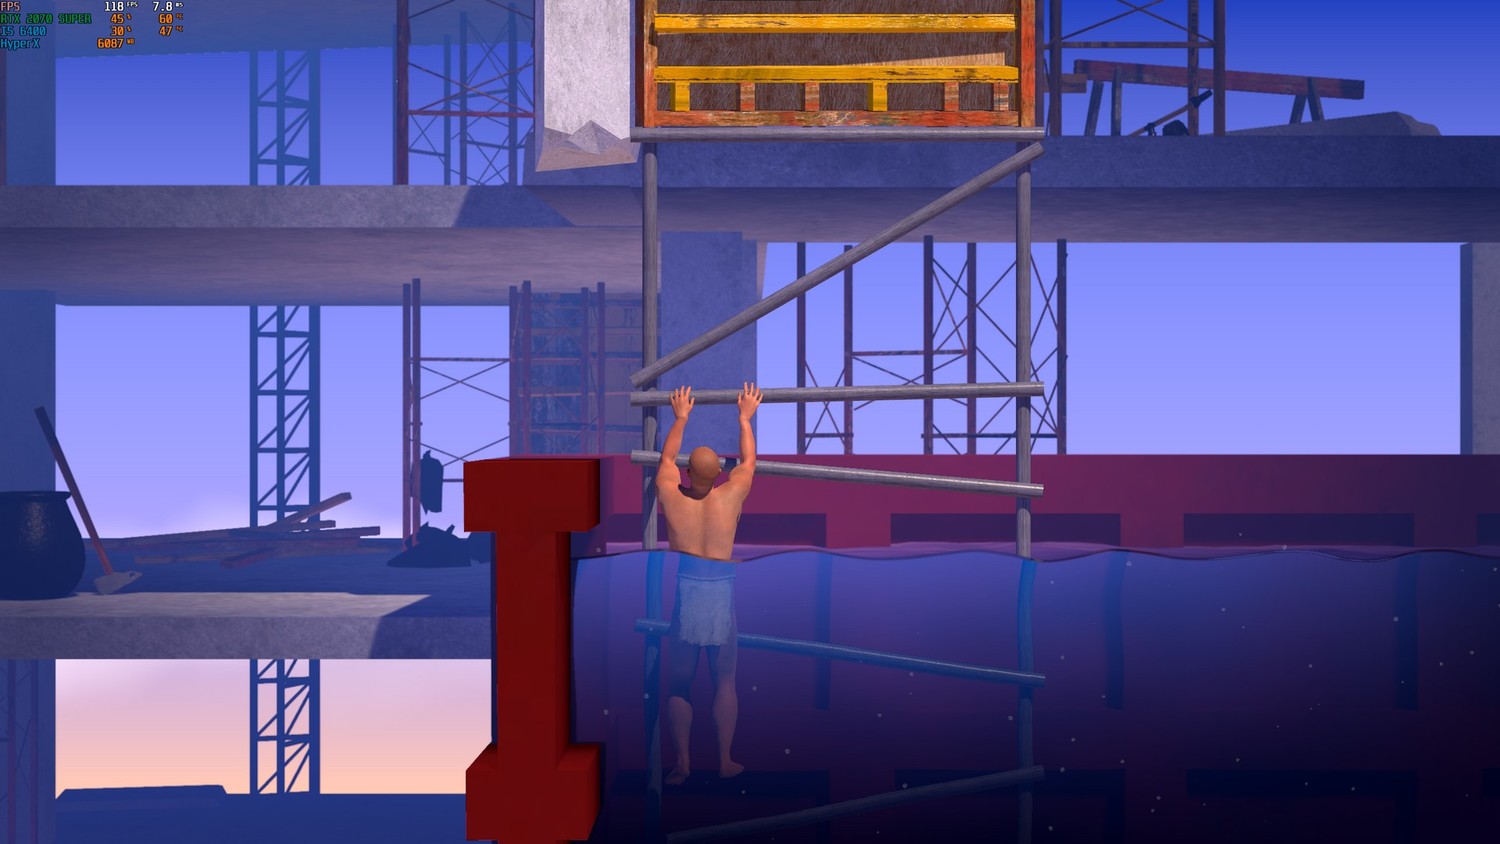 A Difficult Game About Climbing: SaveGame (start with a pool at a construction site)